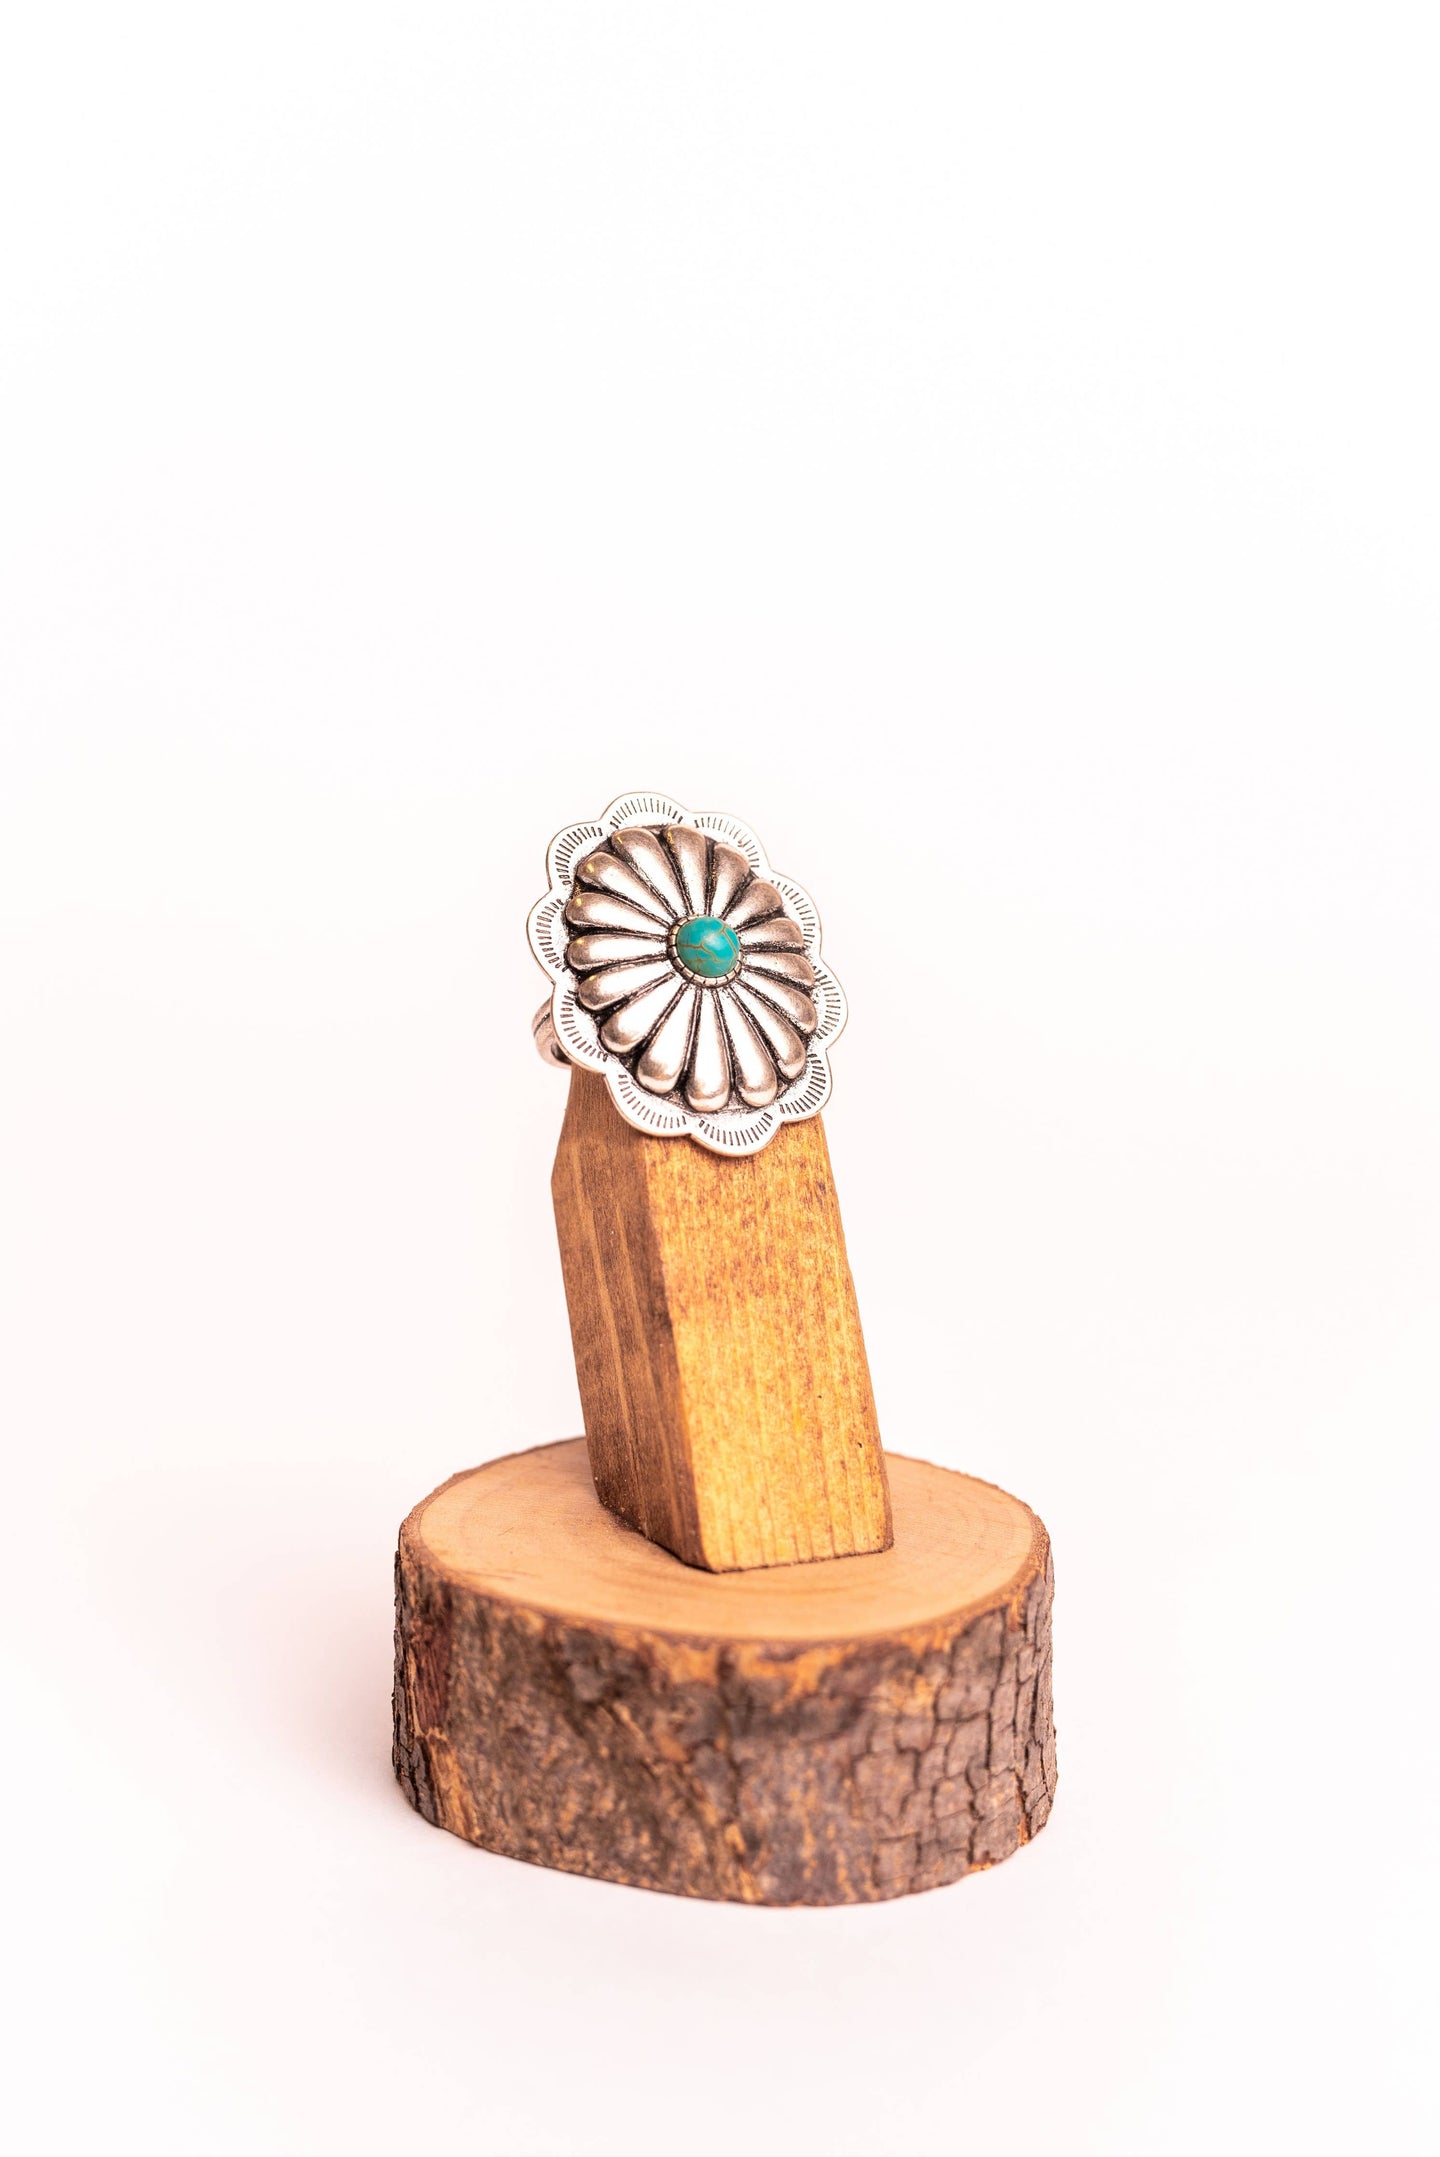 This large burnished silver adjustable concho ring with a turquoise stone accent is sure to attract compliments. Pairs well with our choker necklace with concho accent. Silver jewelry sets. Western Jewelry for Women. The Jolene Collection - Lucky Birds Boutique